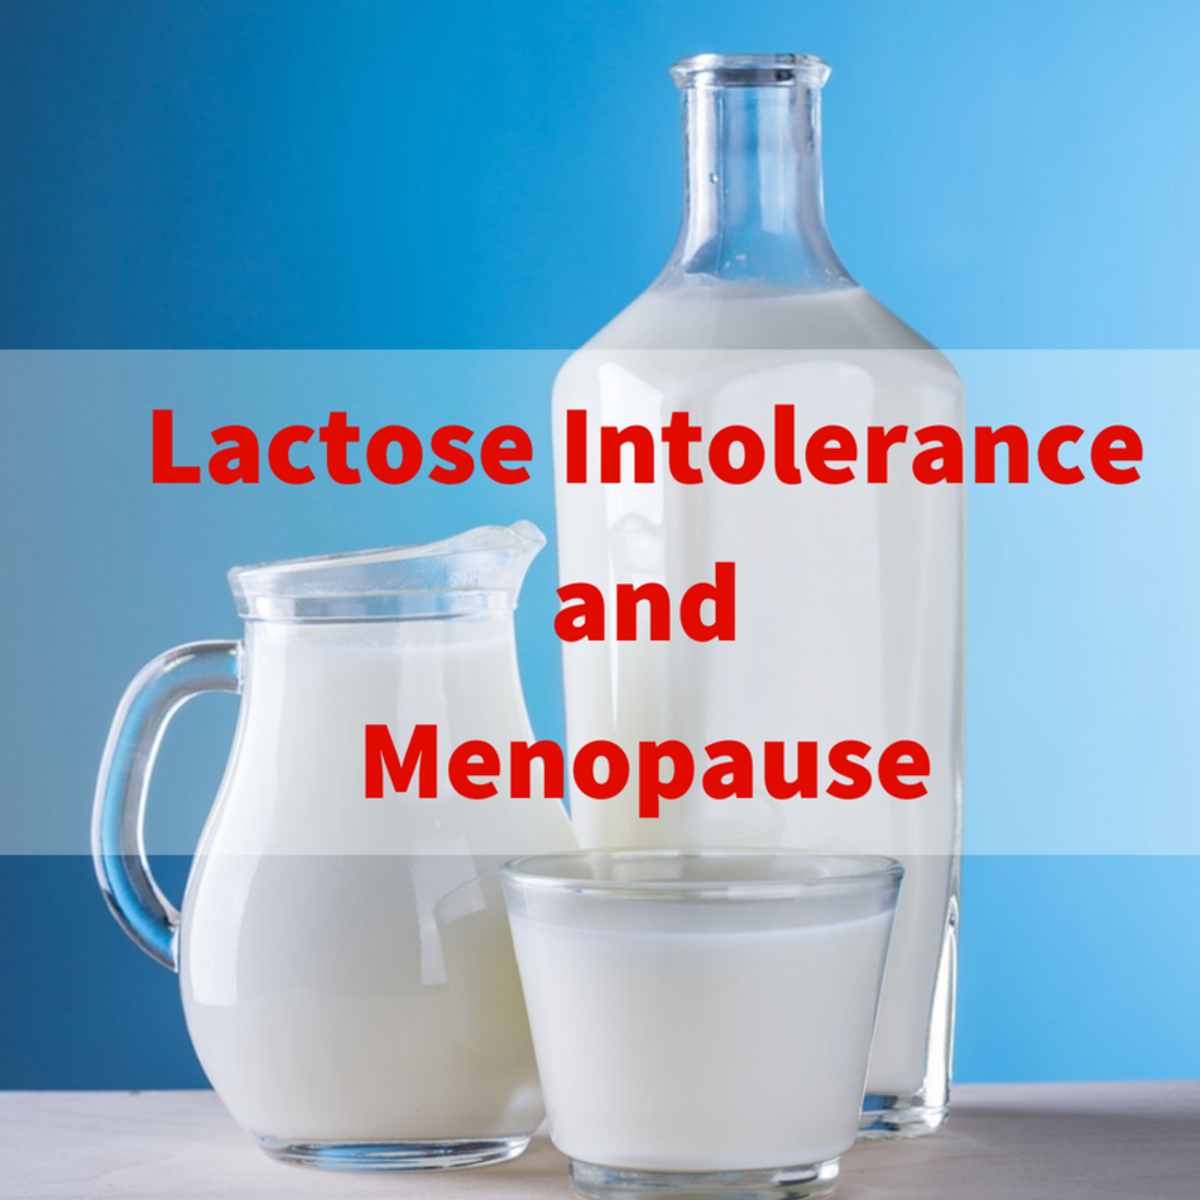 Some women may develop lactose intolerance during menopause.